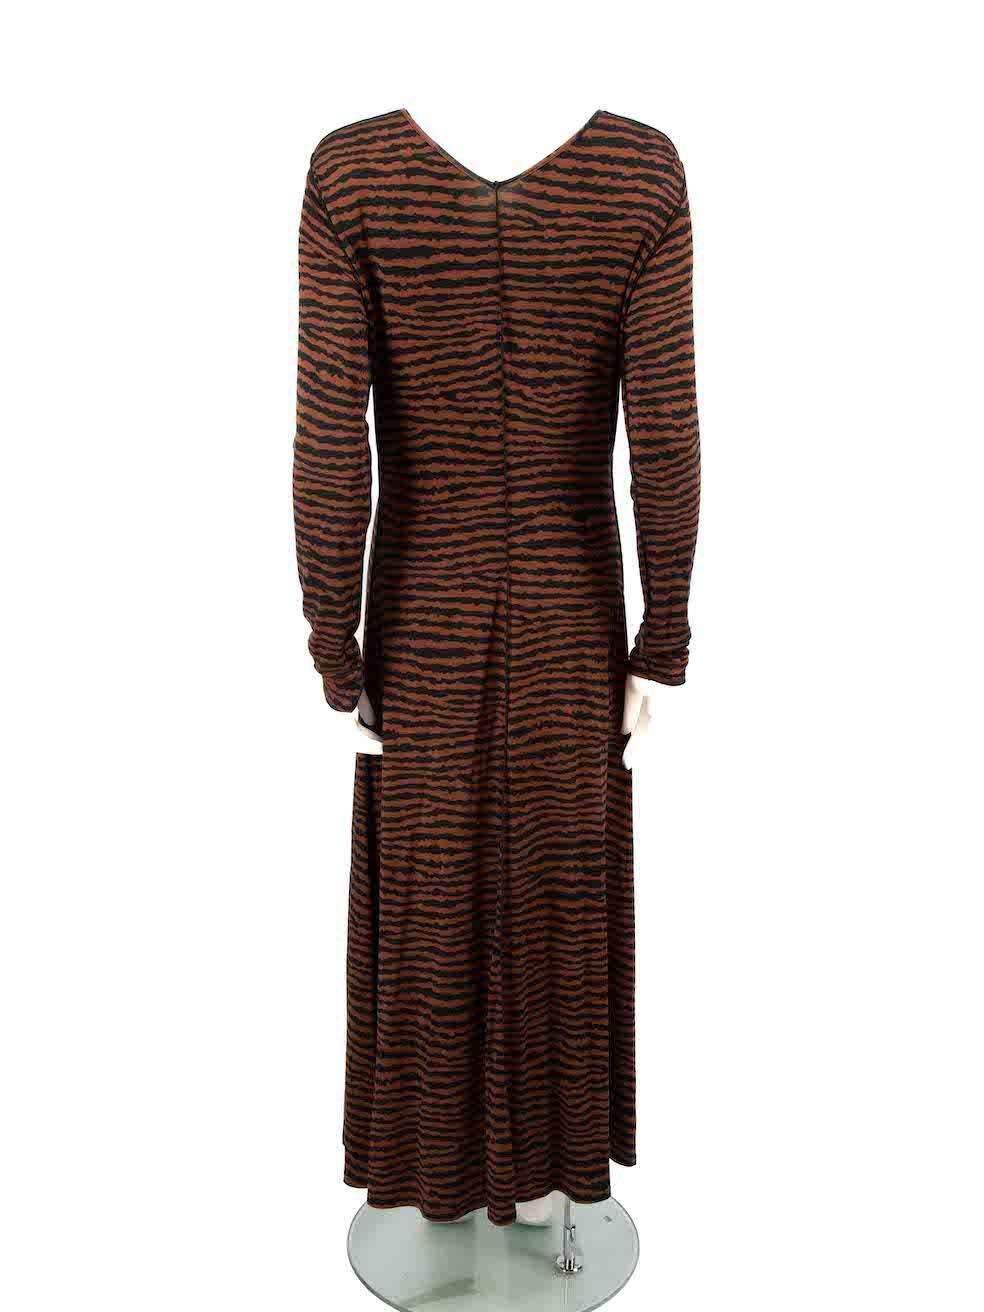 Proenza Schouler Brown Striped Long Sleeve Dress Size L In Excellent Condition For Sale In London, GB